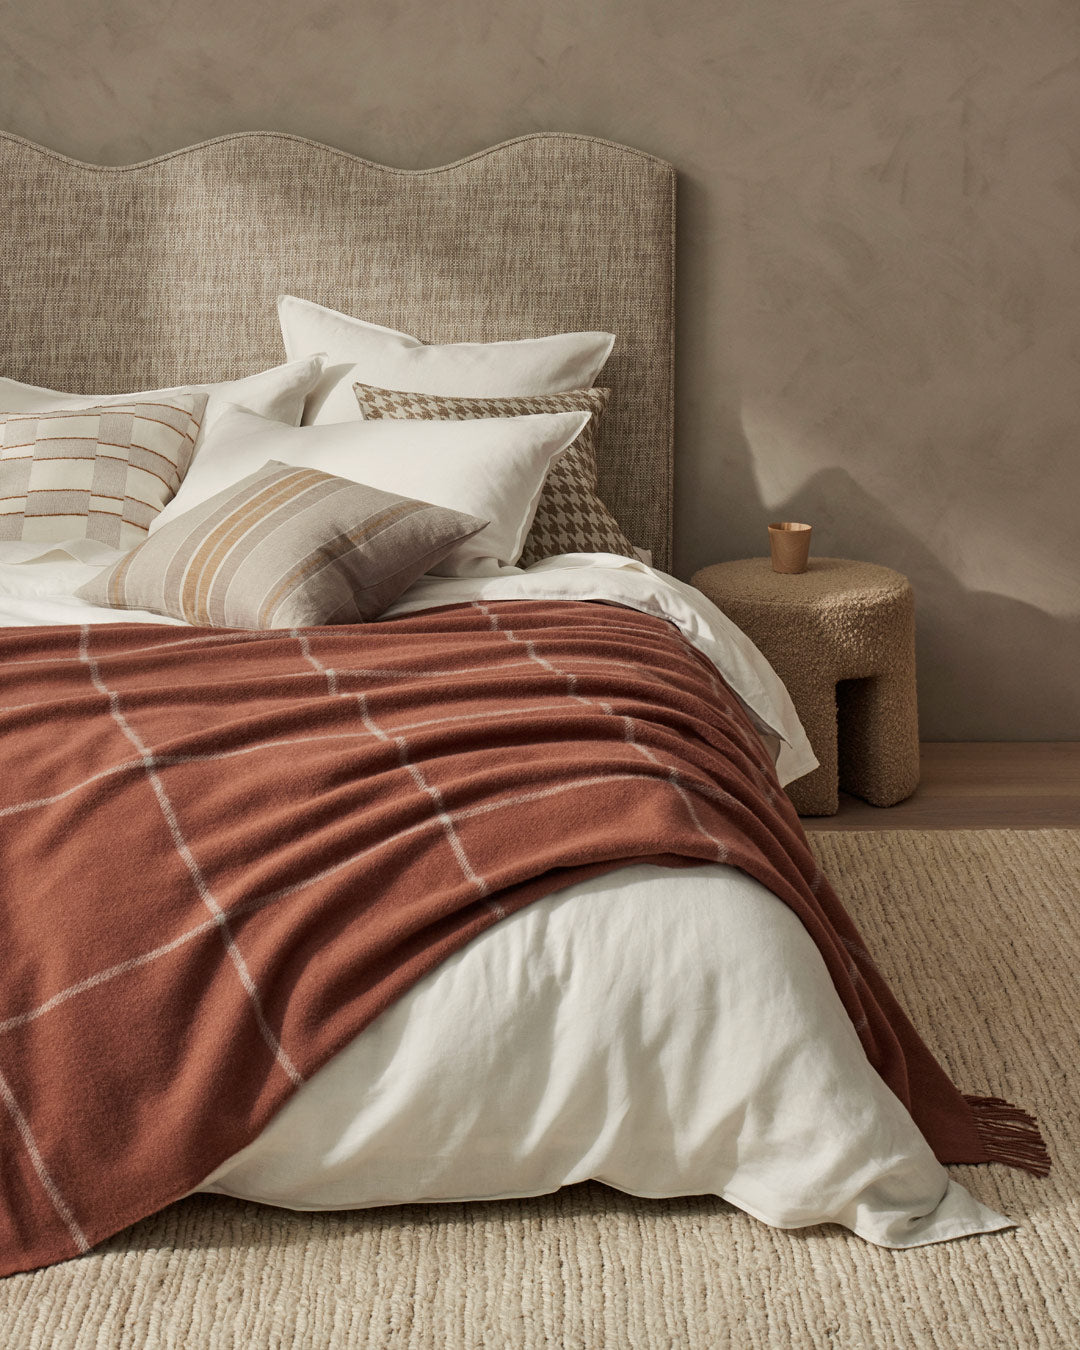 warm toned ranfurly throw with large scale check  draped over a bed with white linen and beige walls and head board. Sitting on a pale cream wool carpet with neural colours on the beds cushion. Along sie is a small boucle fabric side table